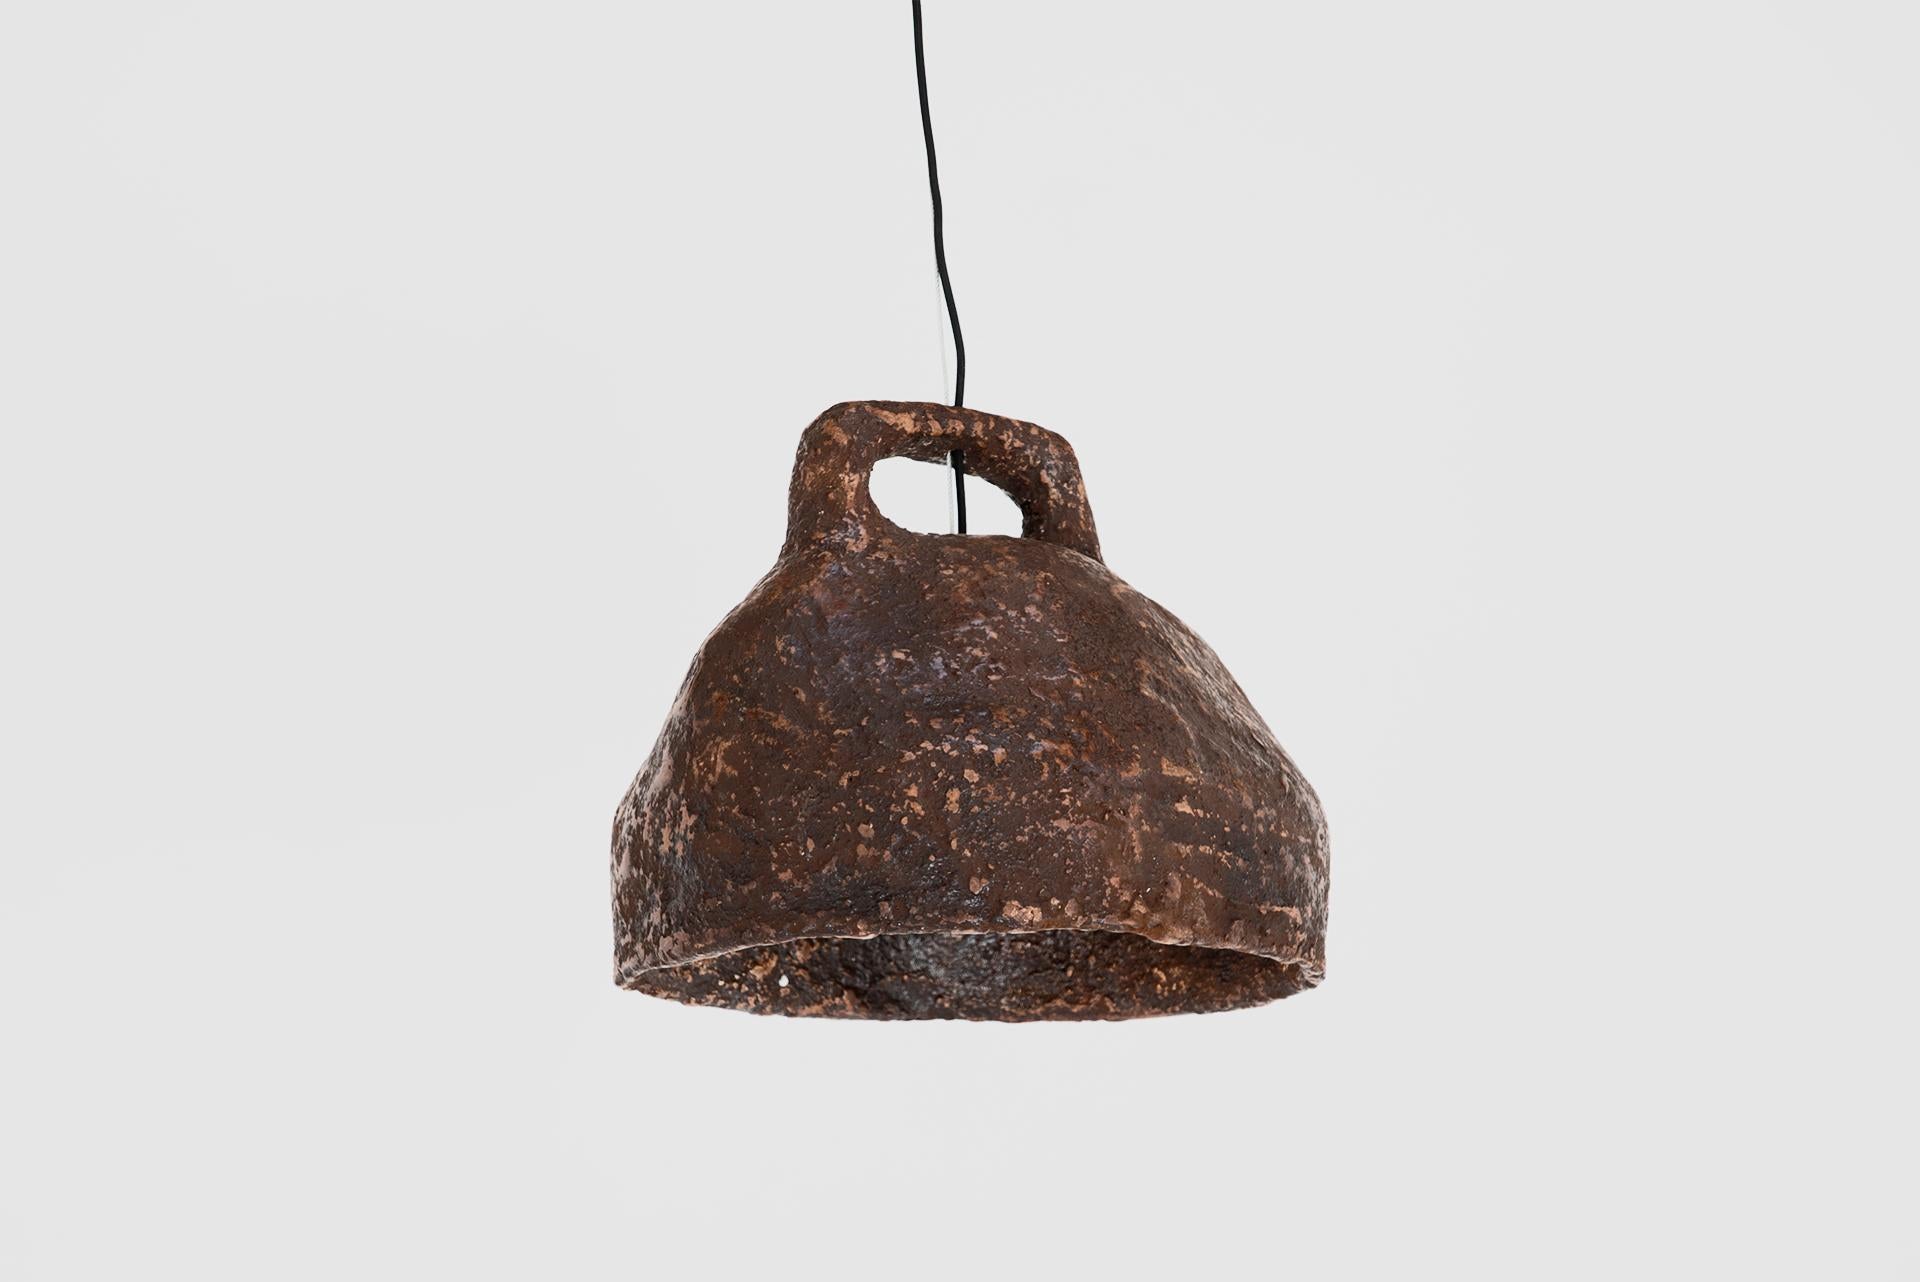 Willem Van Hooff Contemporary Clay Hanging Lamp from the Series 